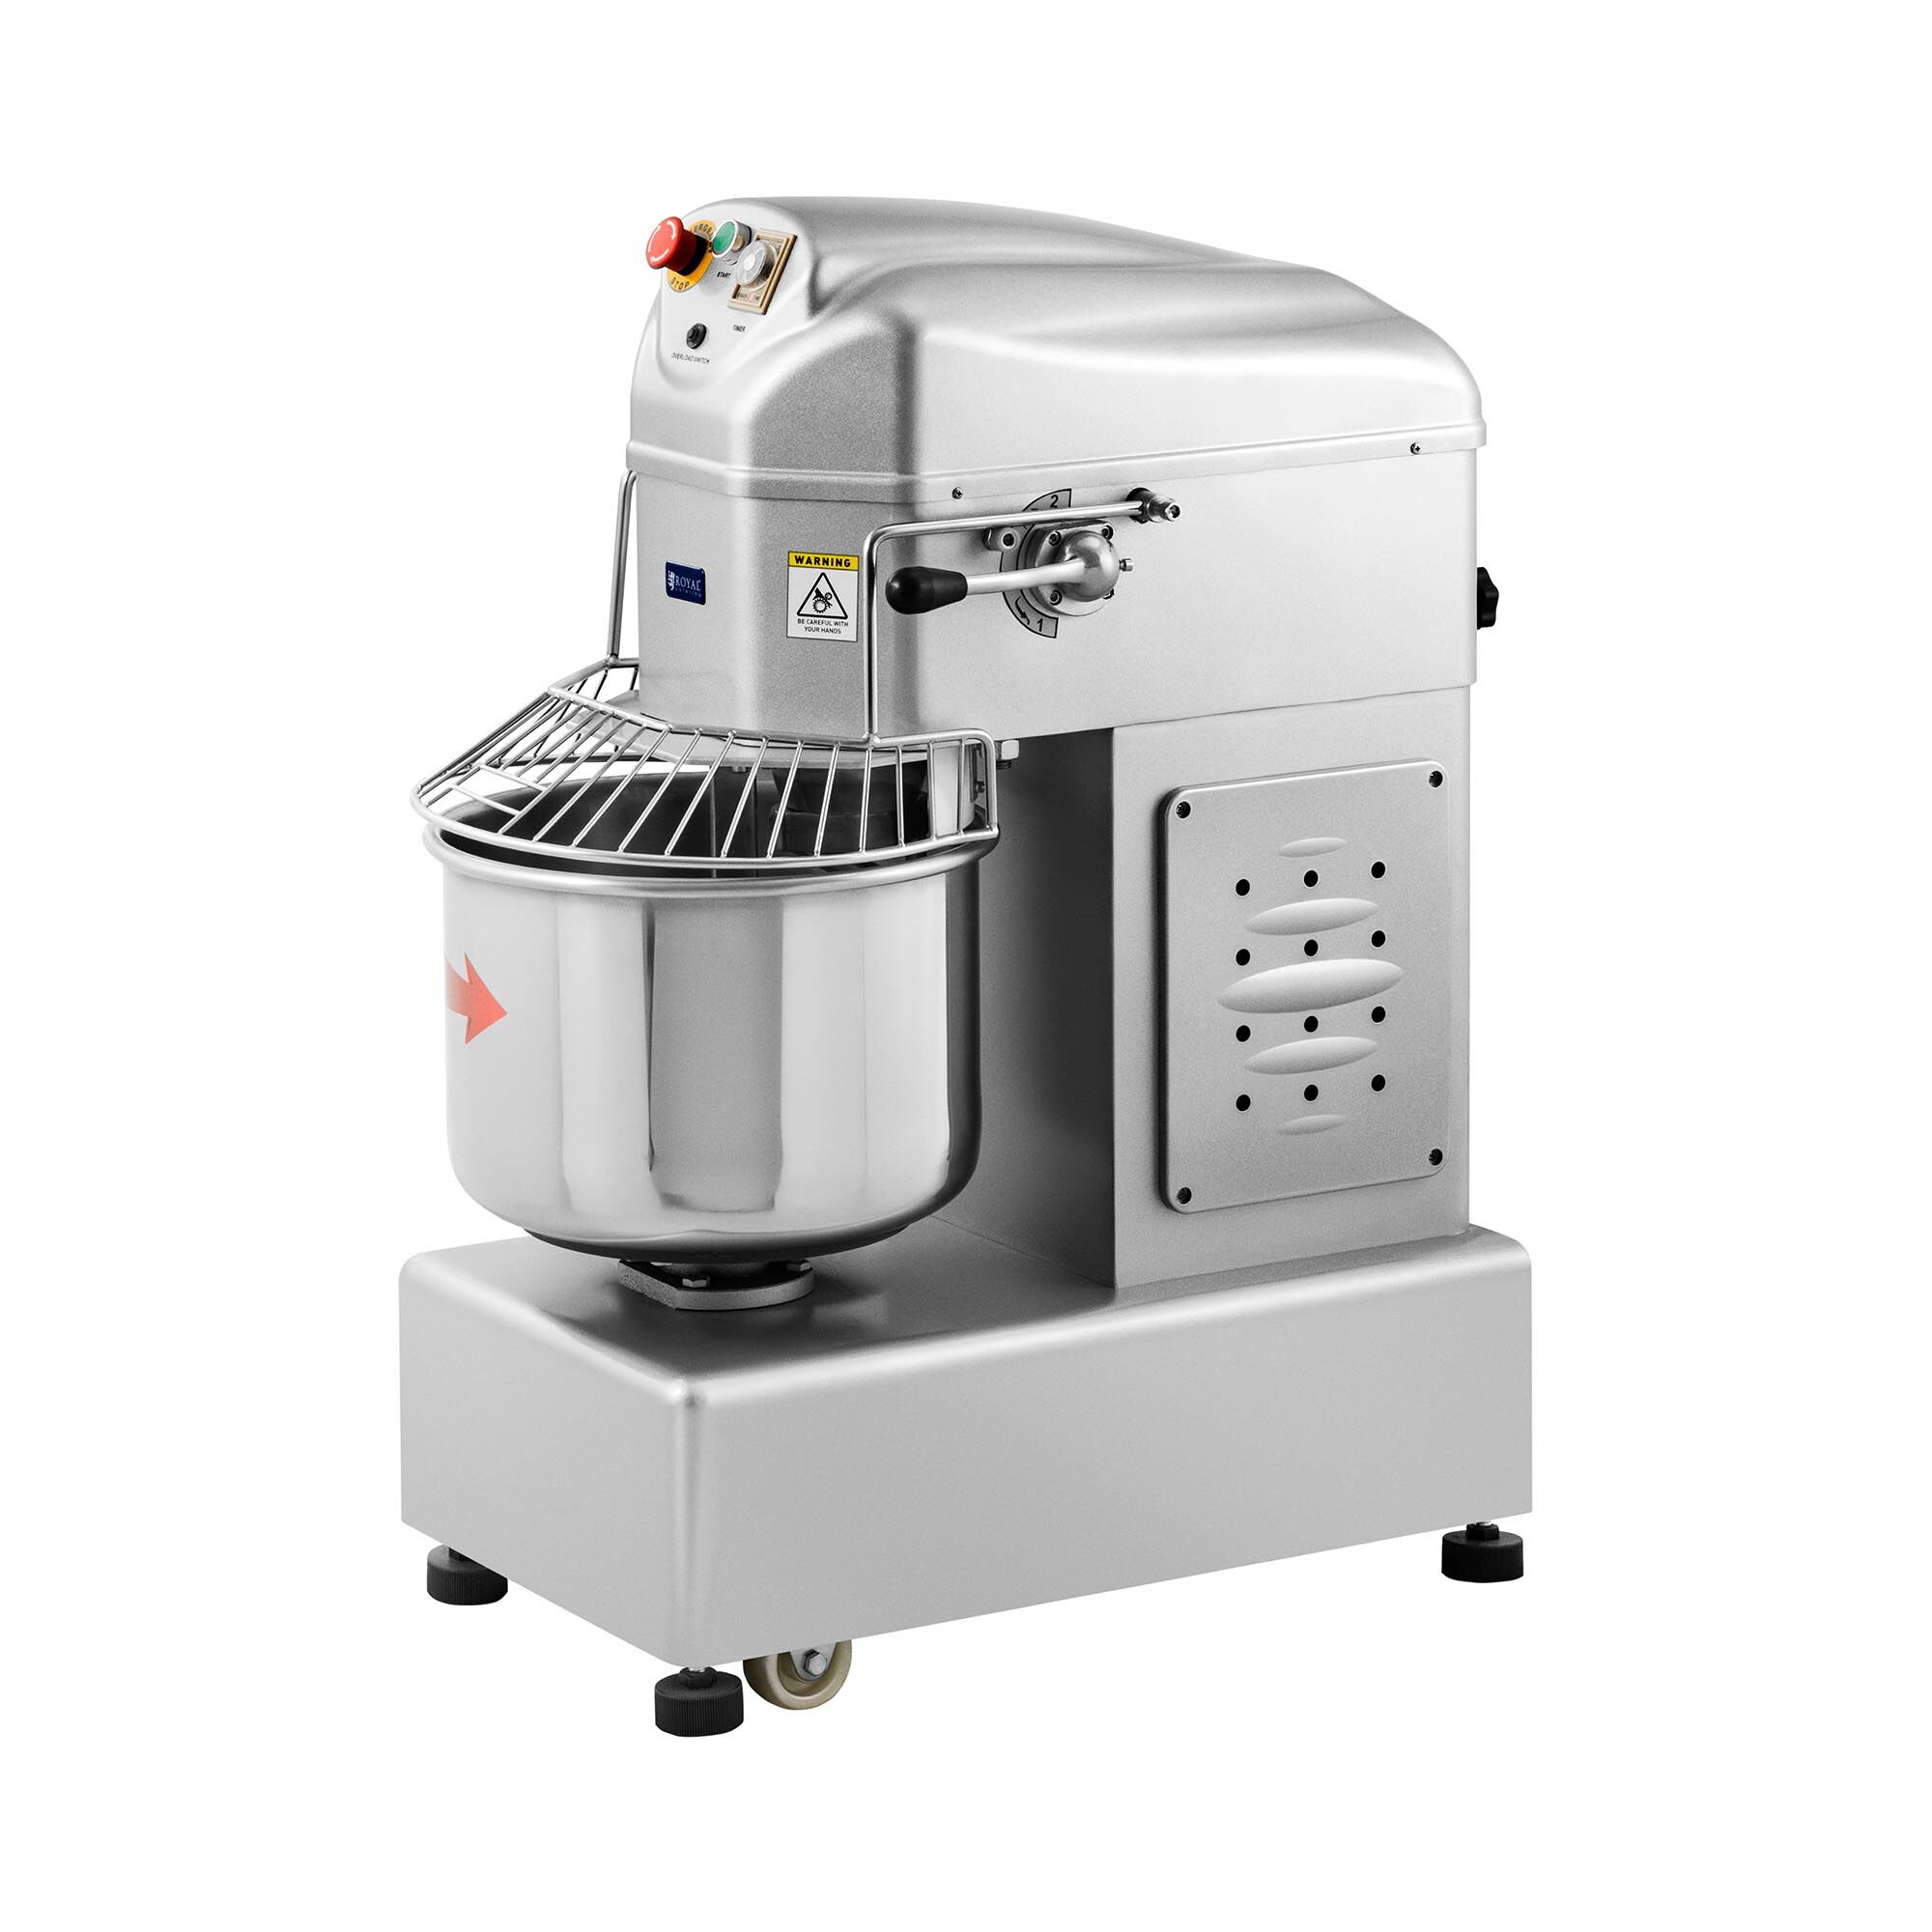 Royal Catering Knetmaschine - 30 L - Royal Catering - 2.100 W